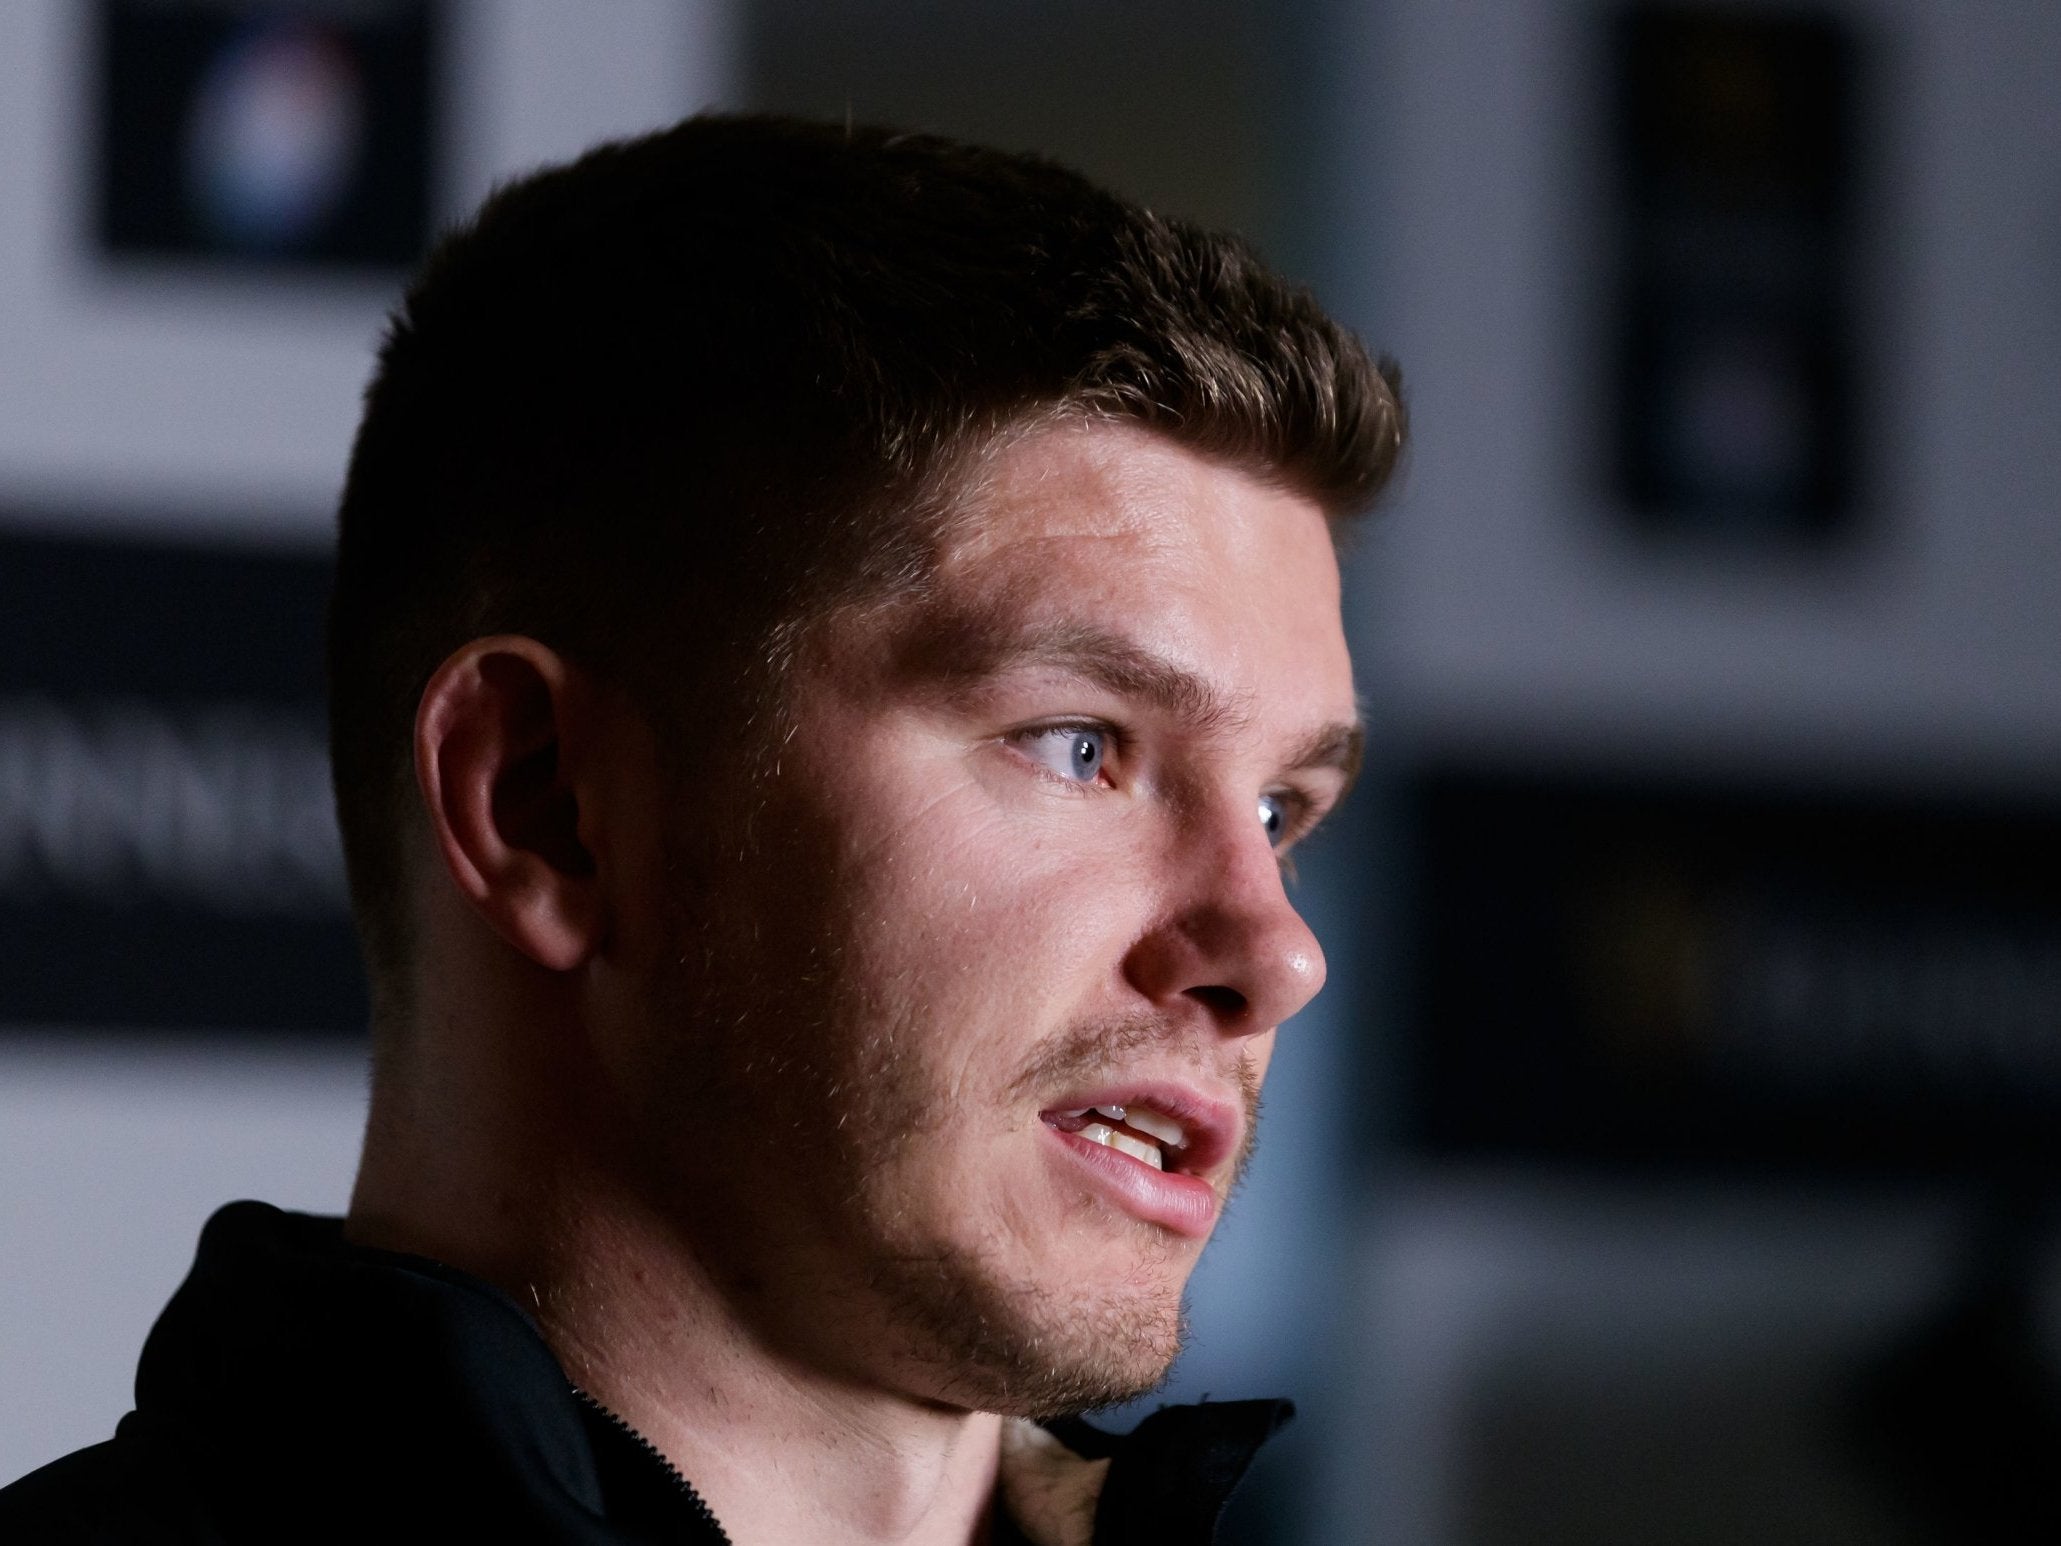 Owen Farrell released a statement raising questions over the new proposal